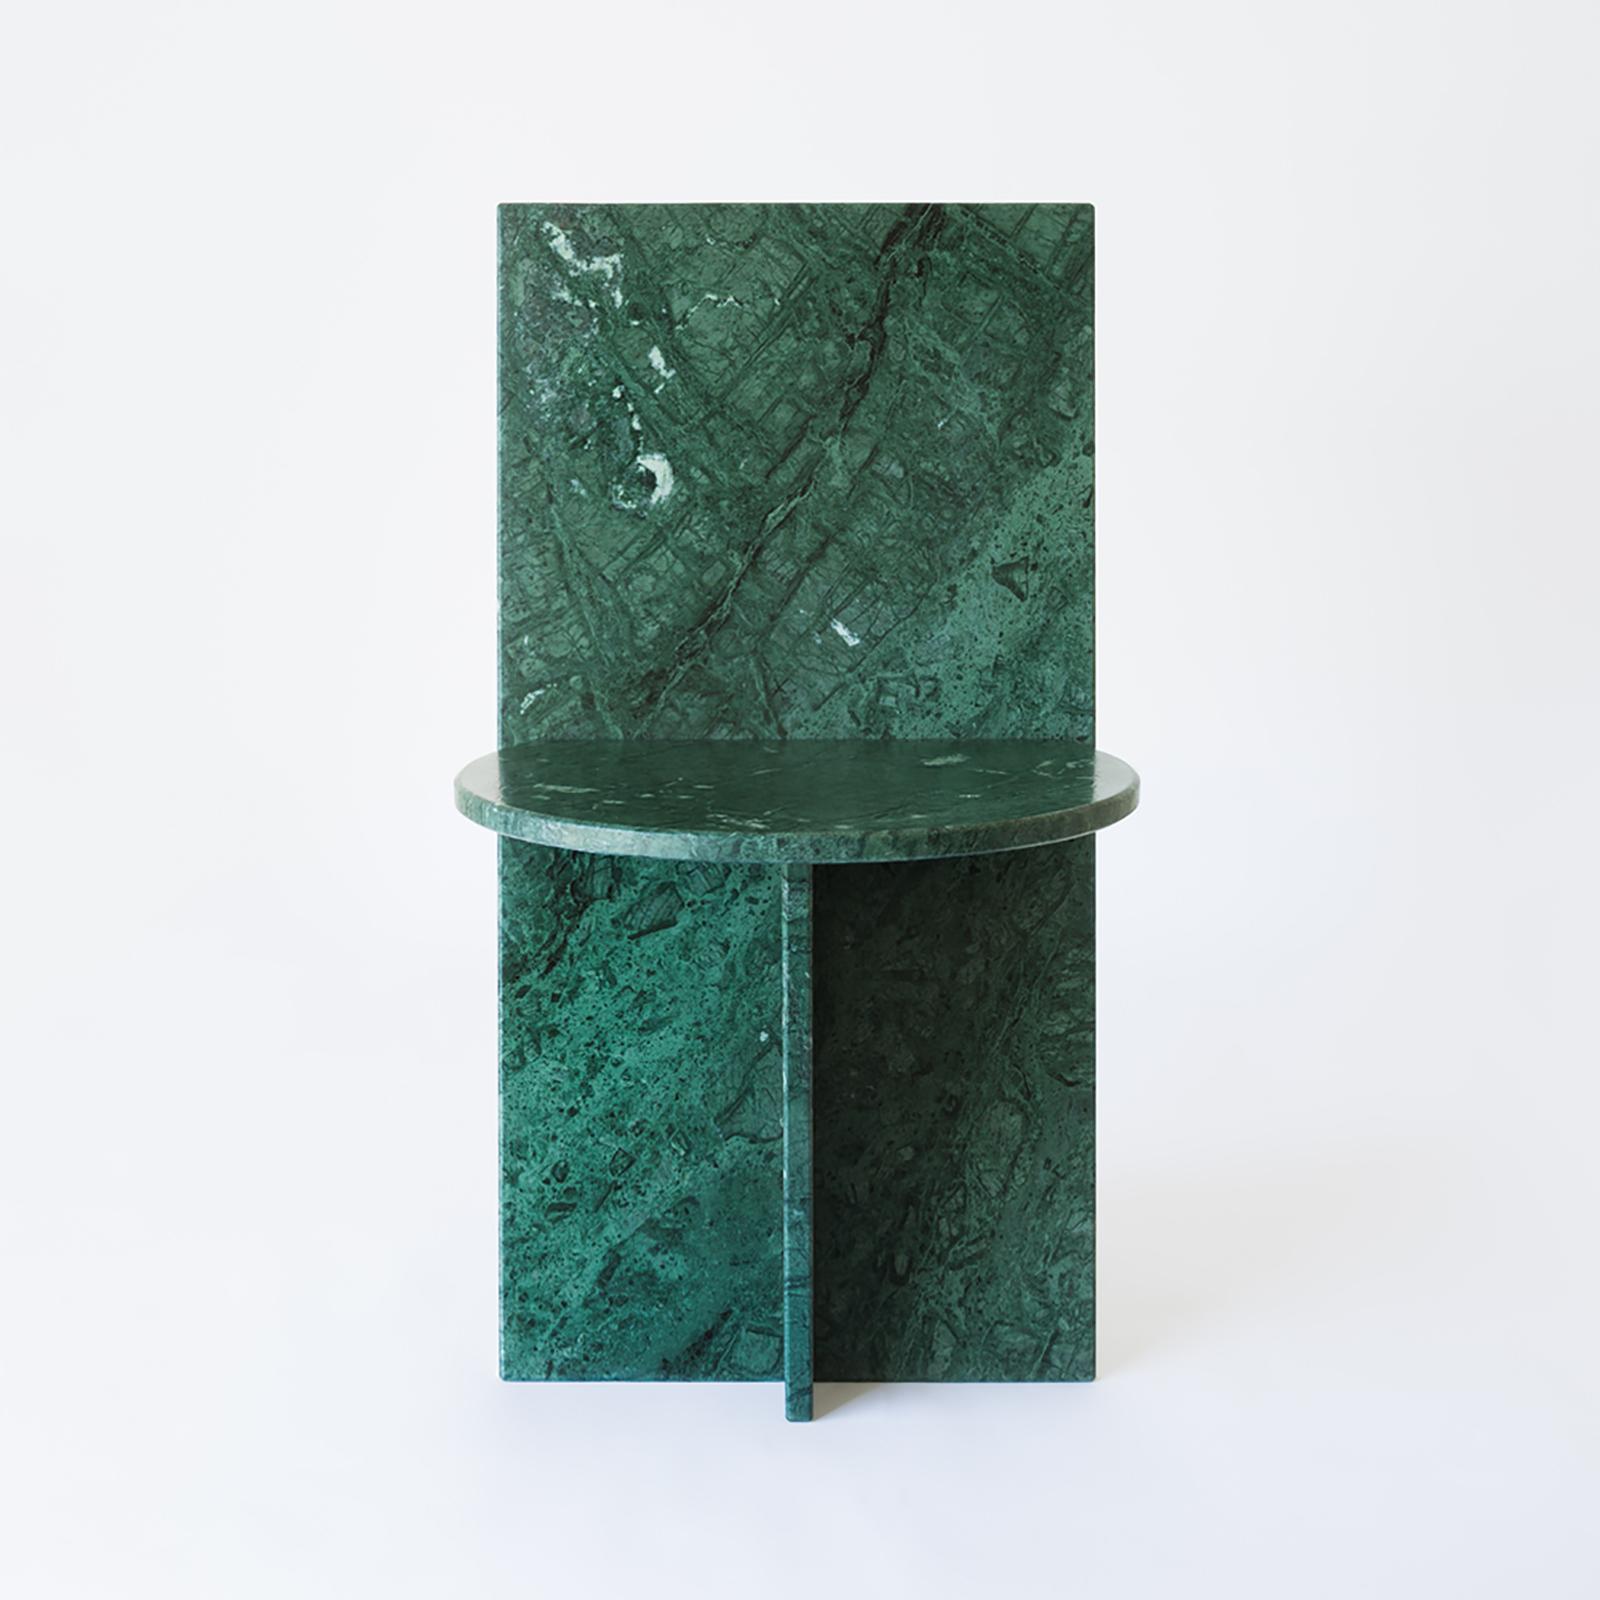 The project of the marble chair Flat is born from the need of not wasting such a precious and natural material such as marble. The chair acquires volume, thanks to the intersection of three slabs two centimetres thick. The pure forms of a rectangle,